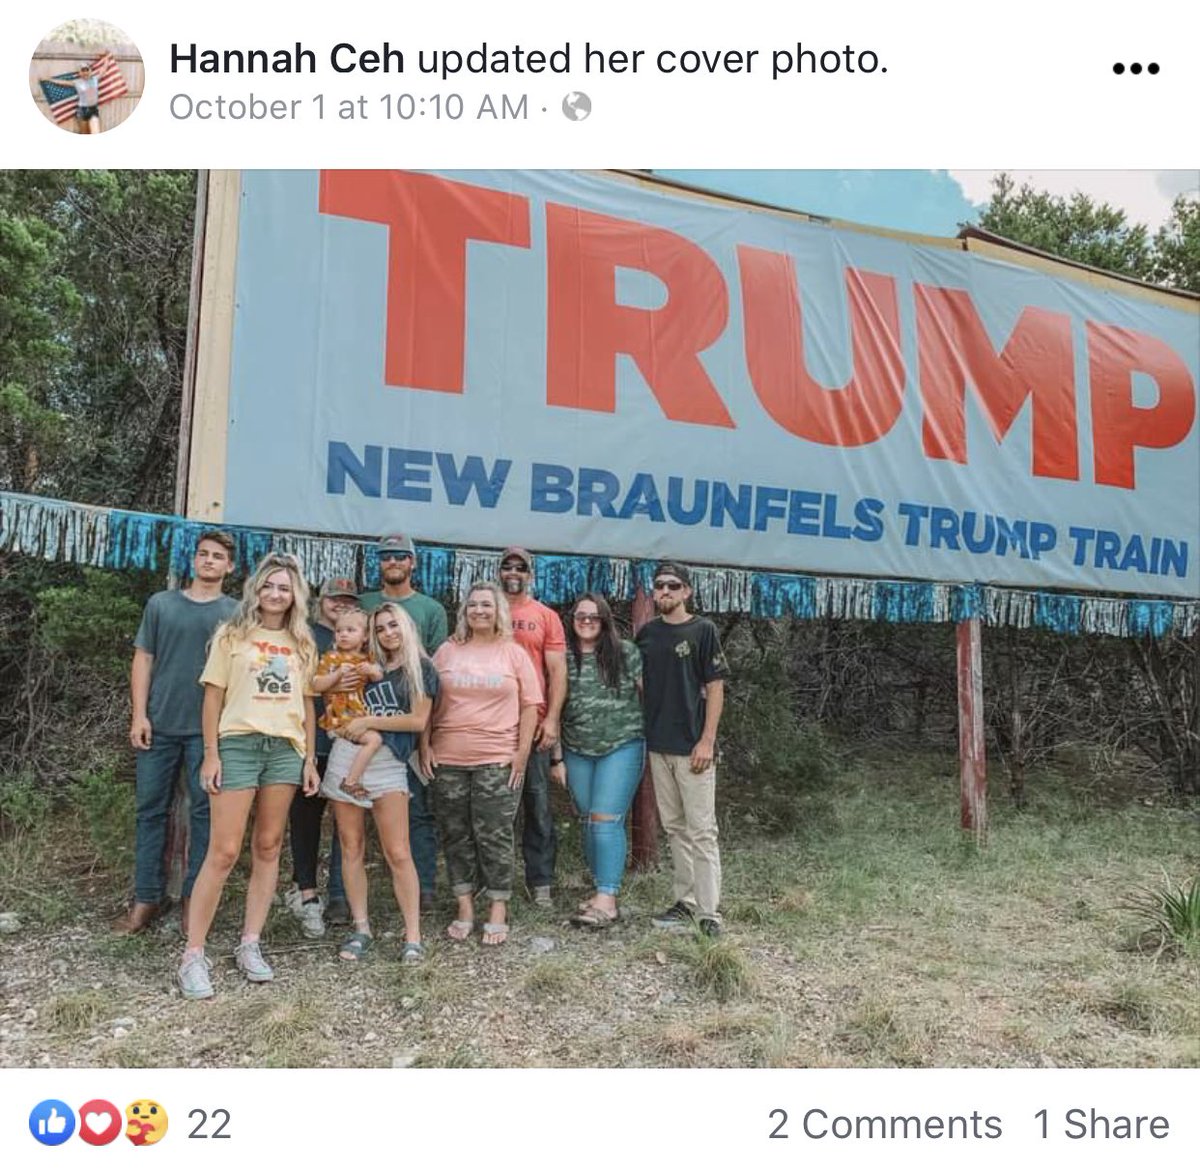 Here’s a pic of Hannah Ceh under a “New Braunfels Trump Train” sign.